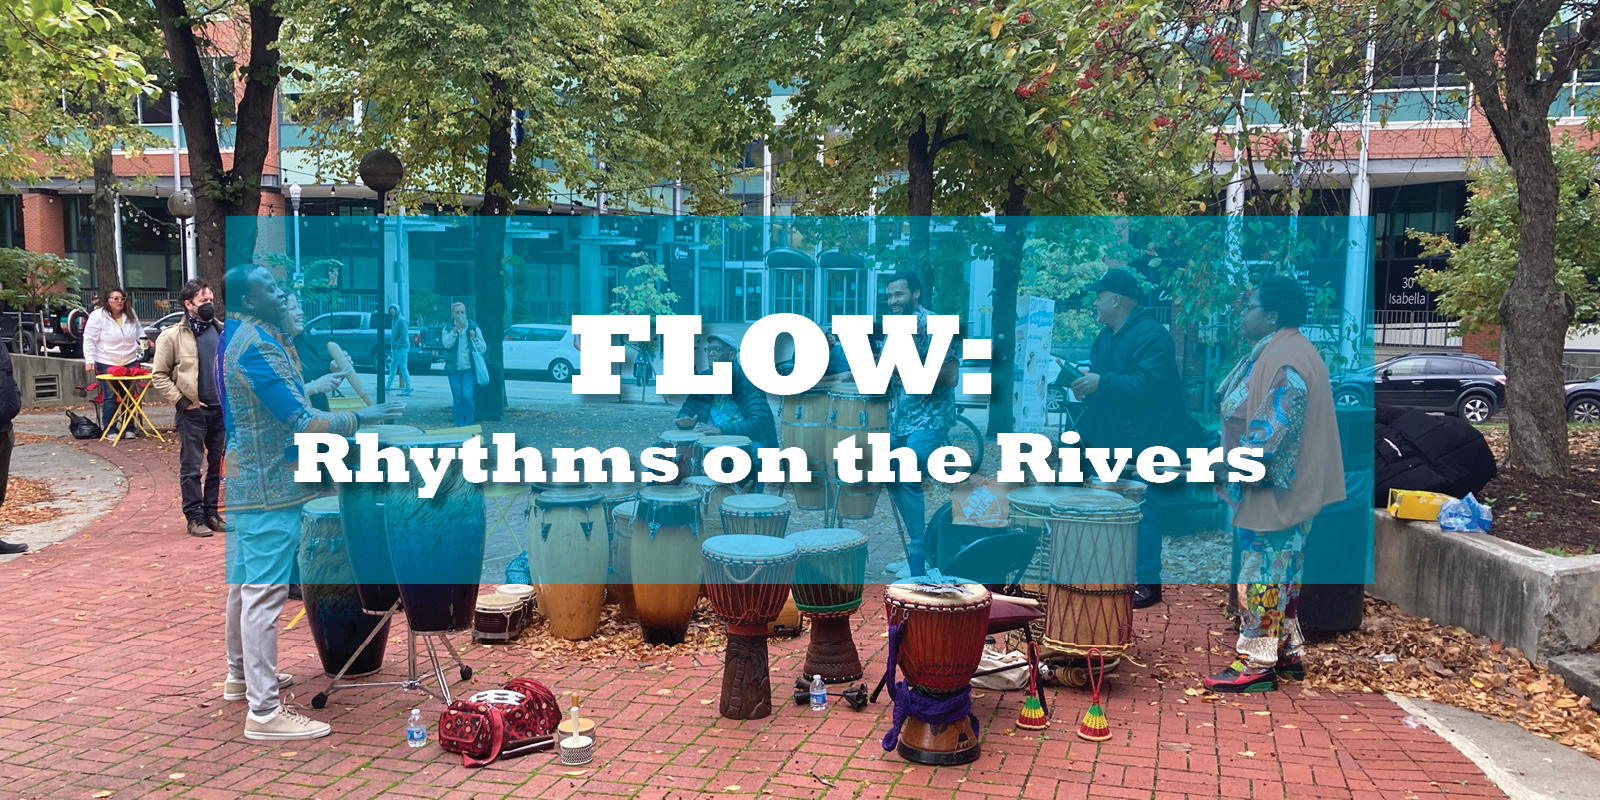 Graphic for FLOW: Rhythms on the Rivers in front of drummers in a public plaza